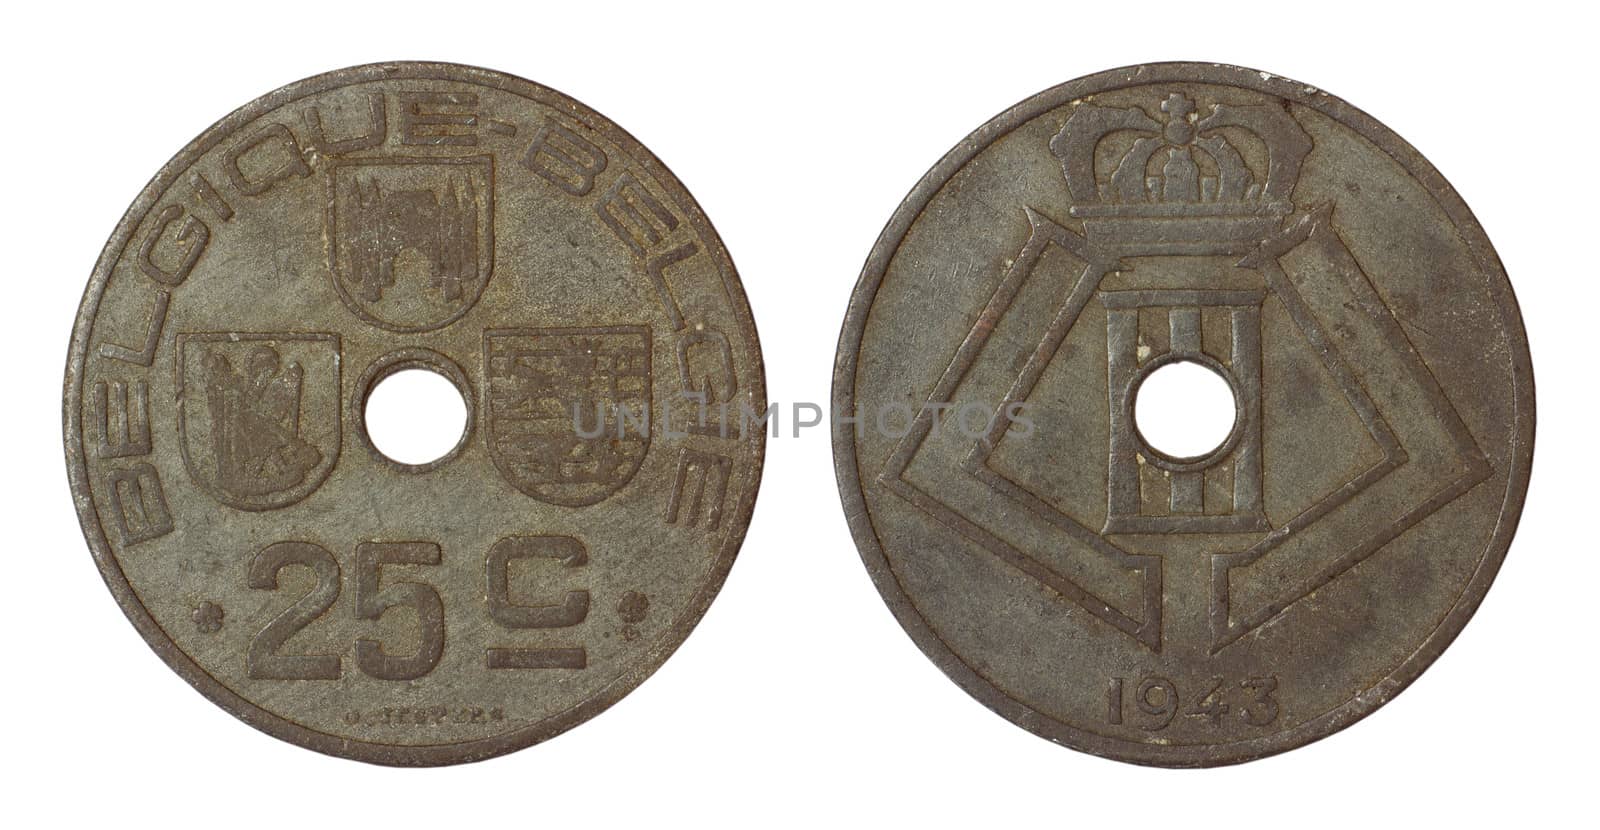 antique rare coin of belgium isolated on white background